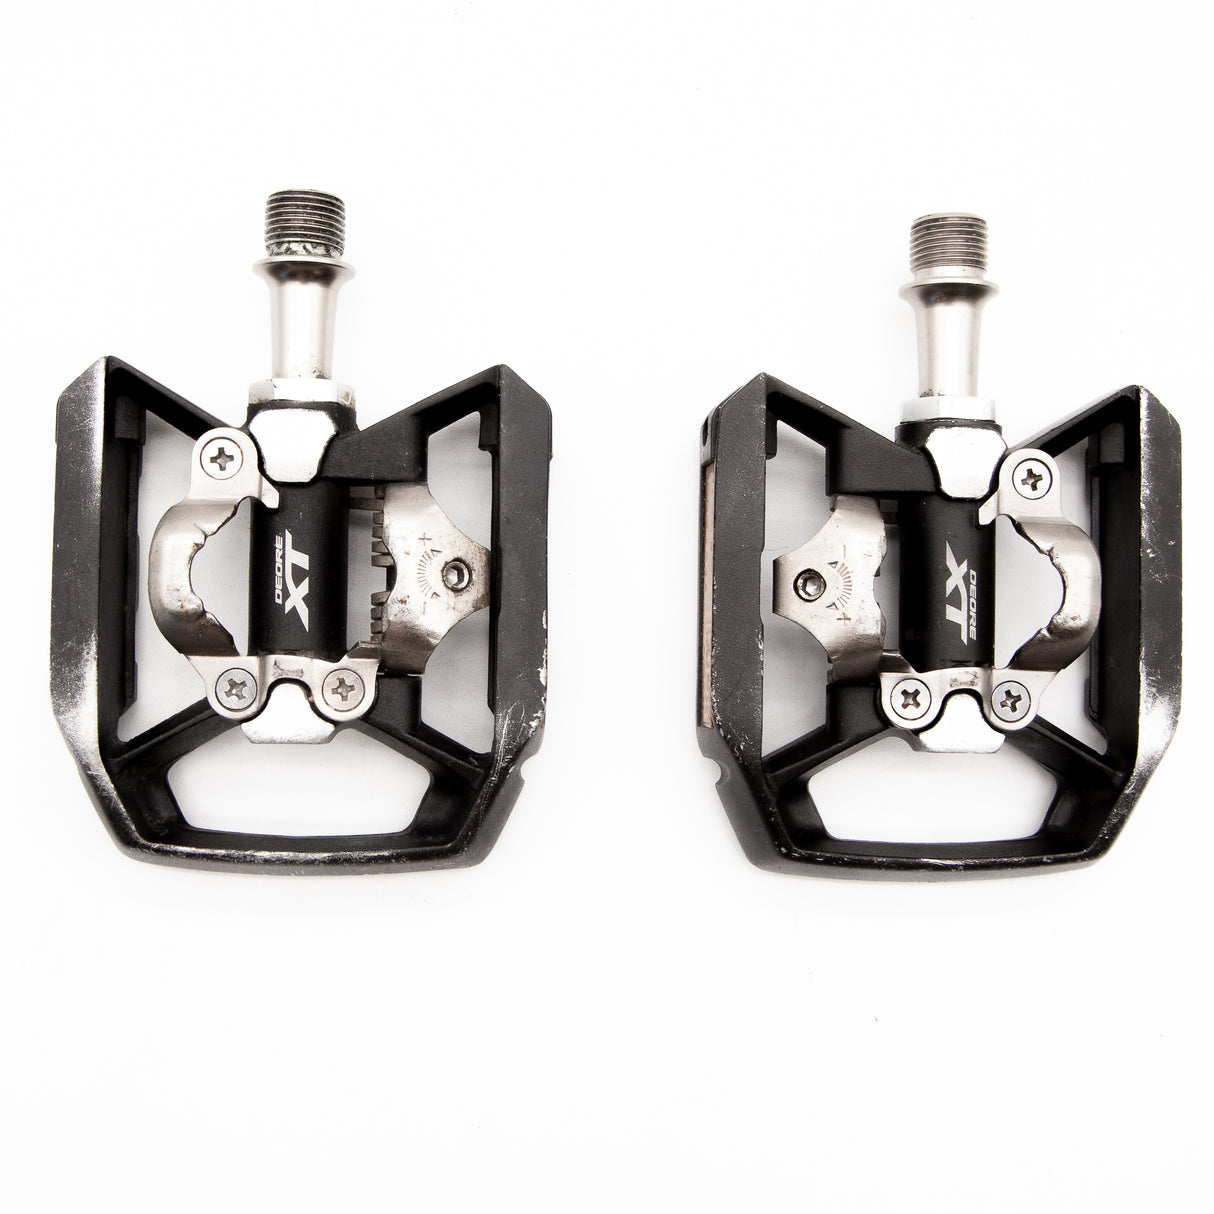 Shimano Deore PD-T8000 Clipless Dual-Platform Pedals 424g